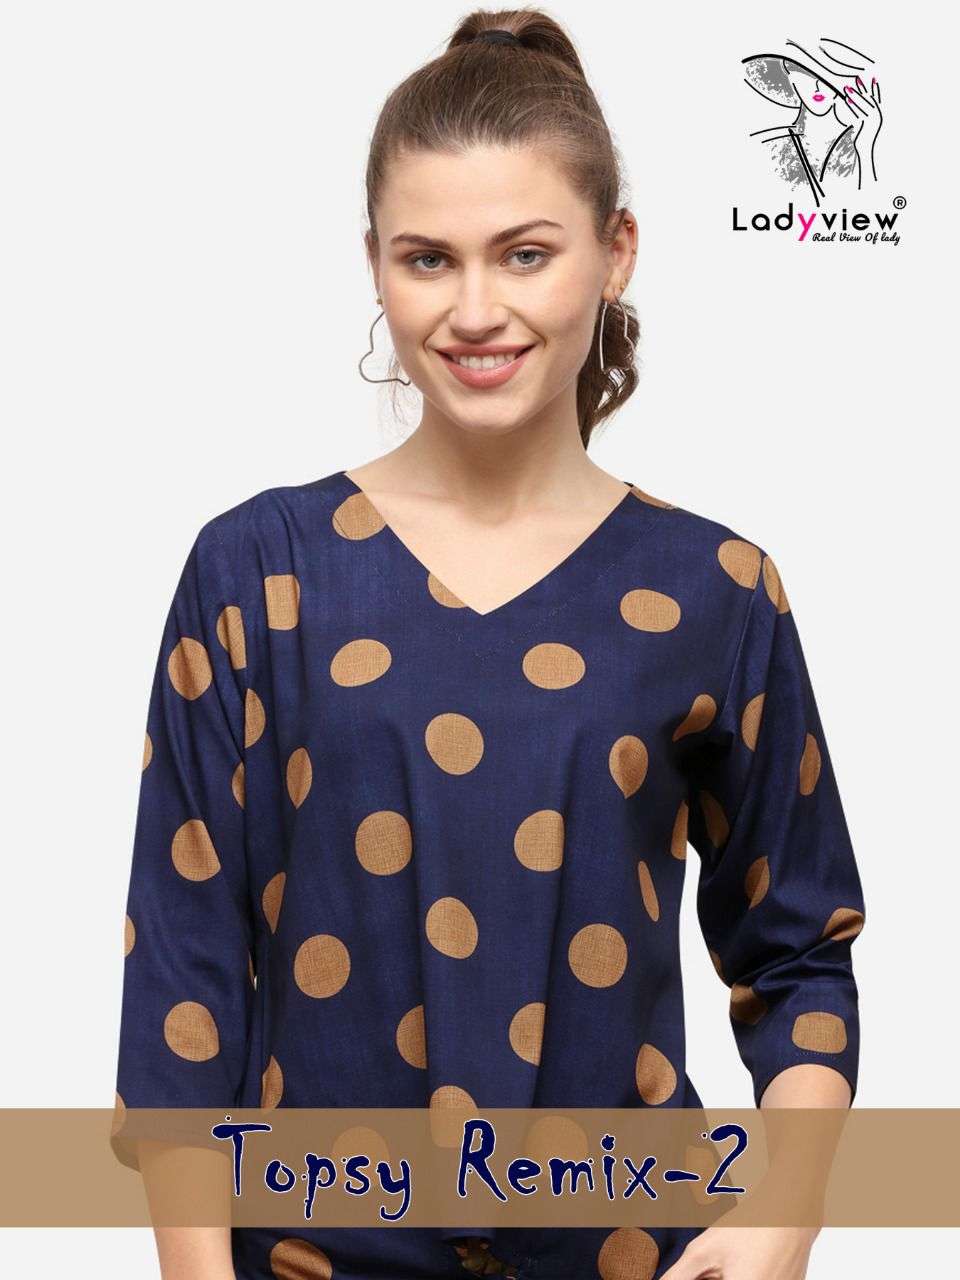 topsy remix vol 2 by ladyview crape digital printed short top supplier